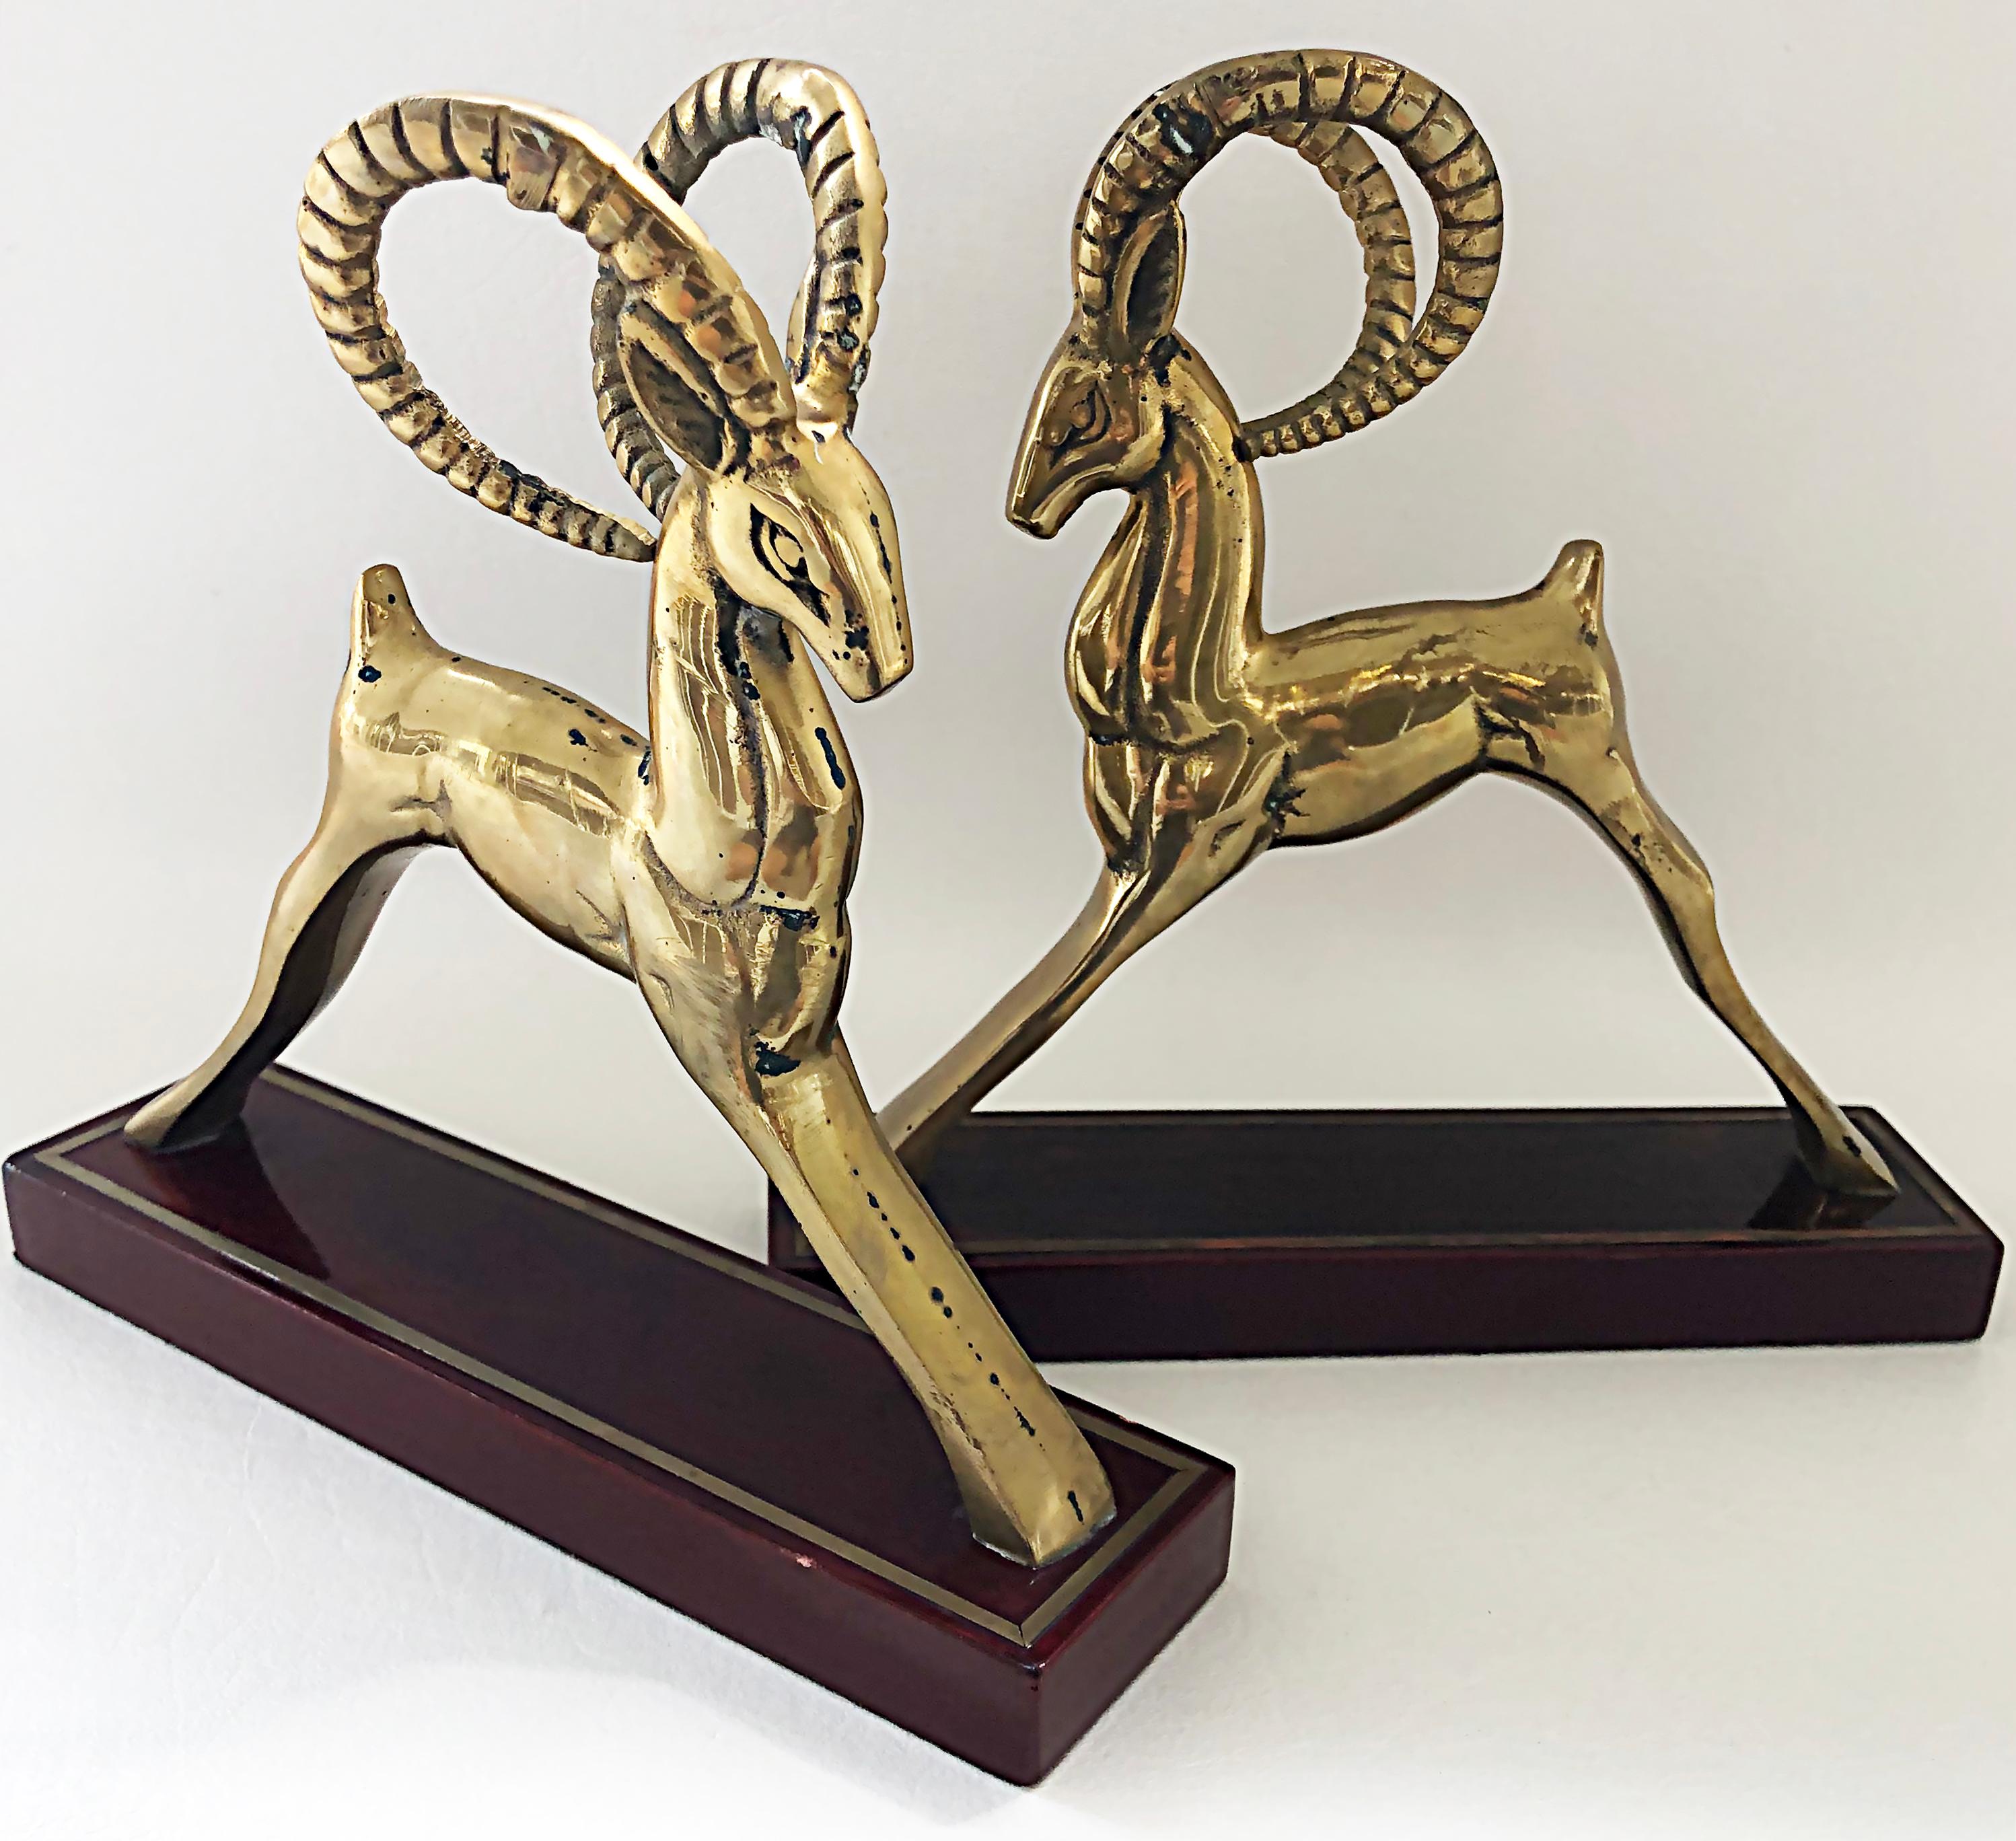 Contemporary Brass Modernist Deco Style Gazelle Bookends Sculptures, a Pair For Sale